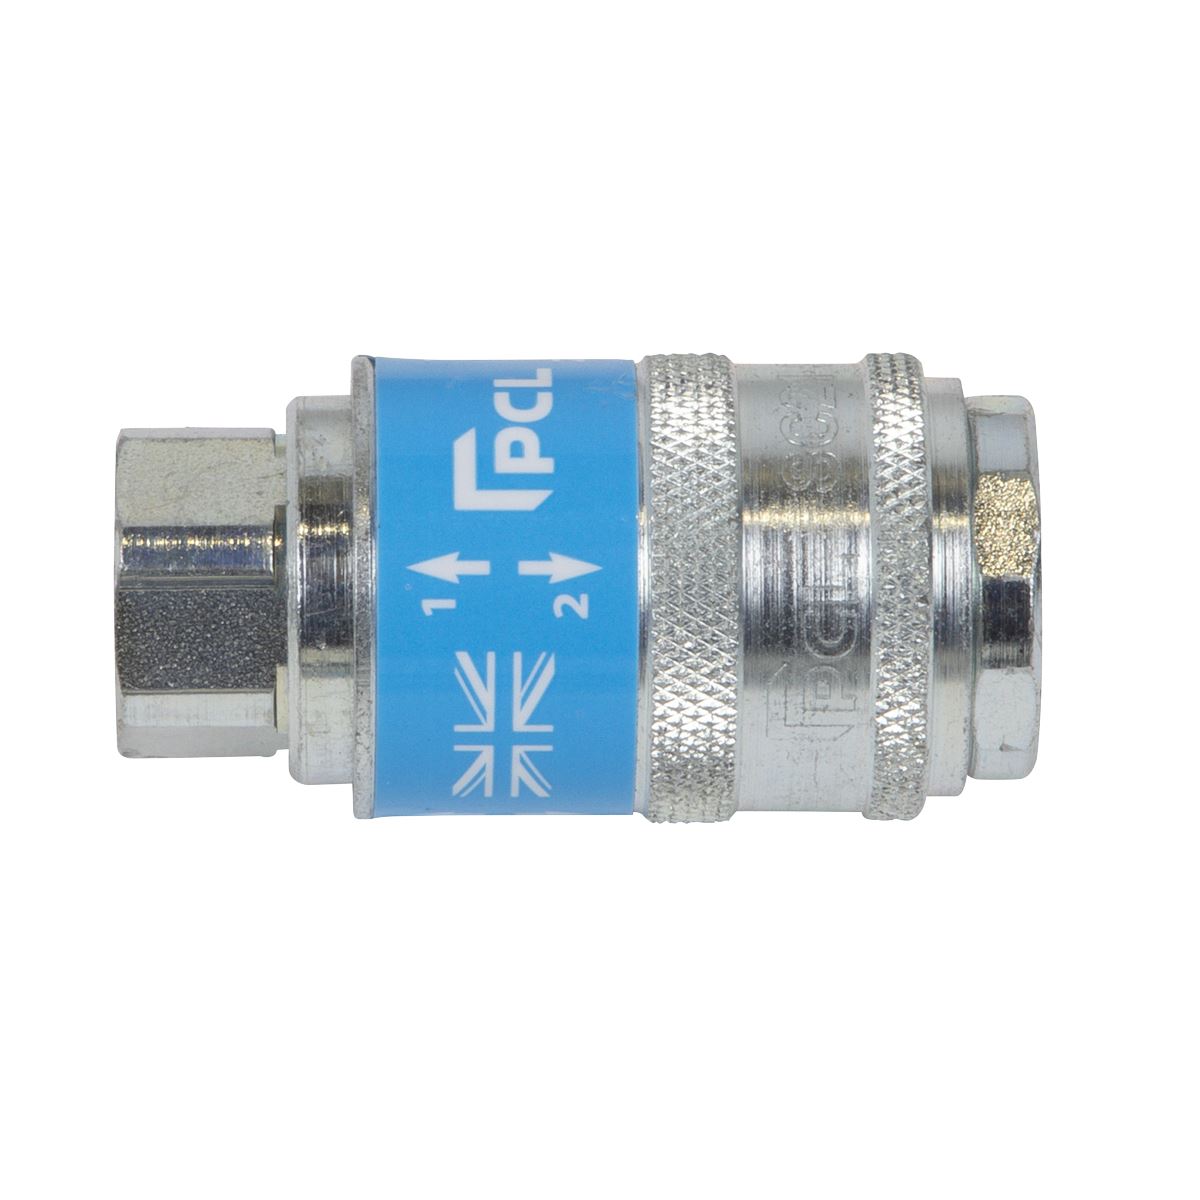 PCL Safeflow Safety Coupling Body Female 3/8"BSP